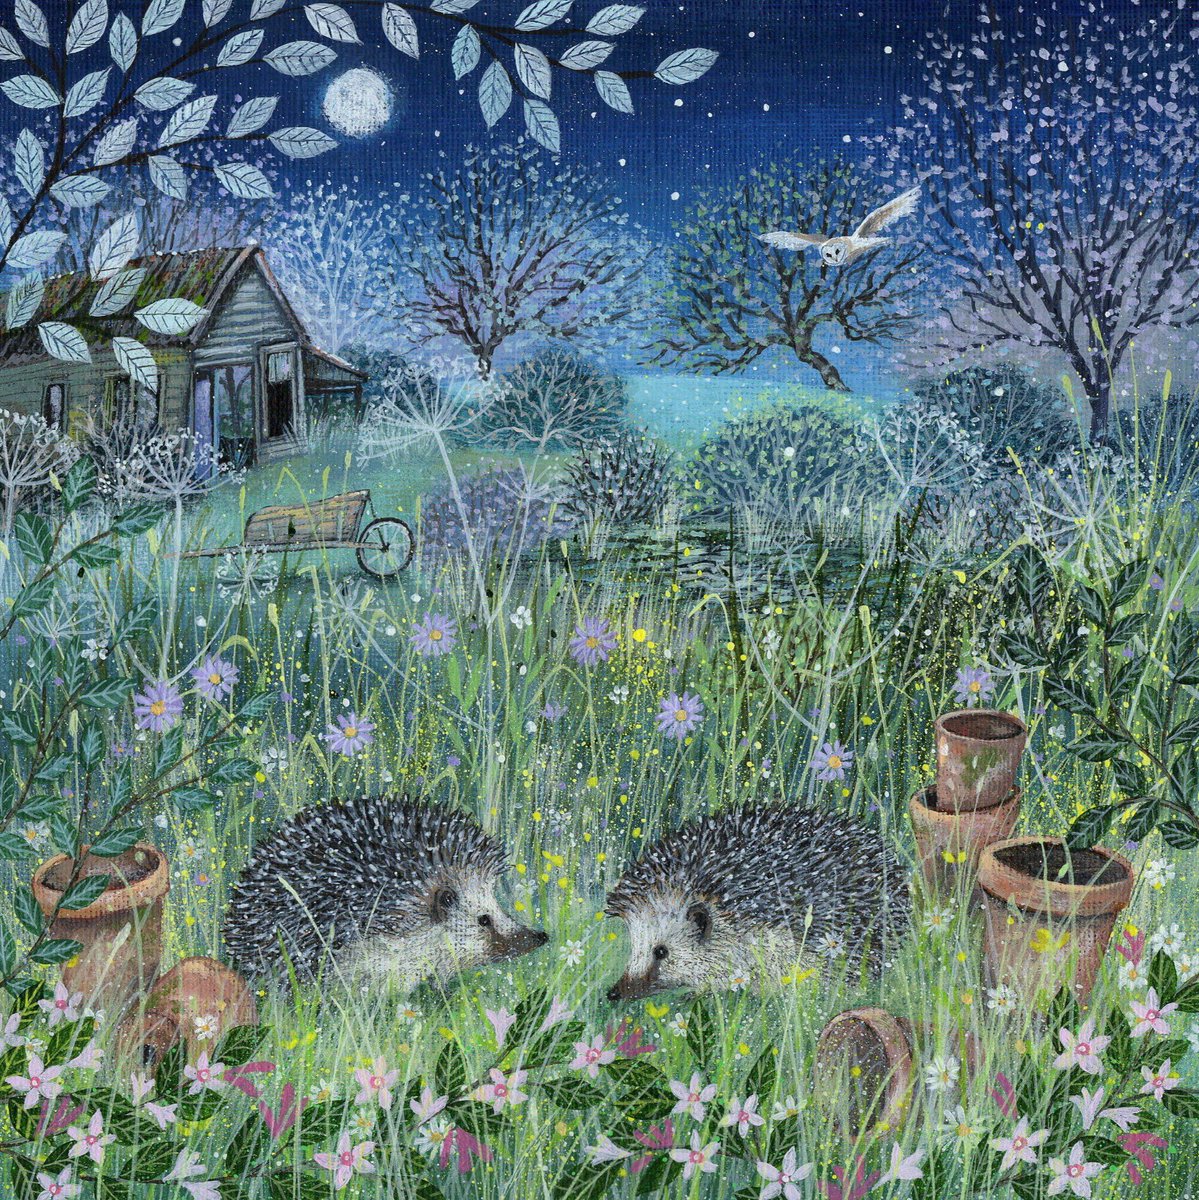 Sometimes we just need to see some cute hedgehogs at the end of a full week lol…I love to post this one. Sweet dreams & stay cozy, everyone 💙 (Art by Lucy Grossmith)